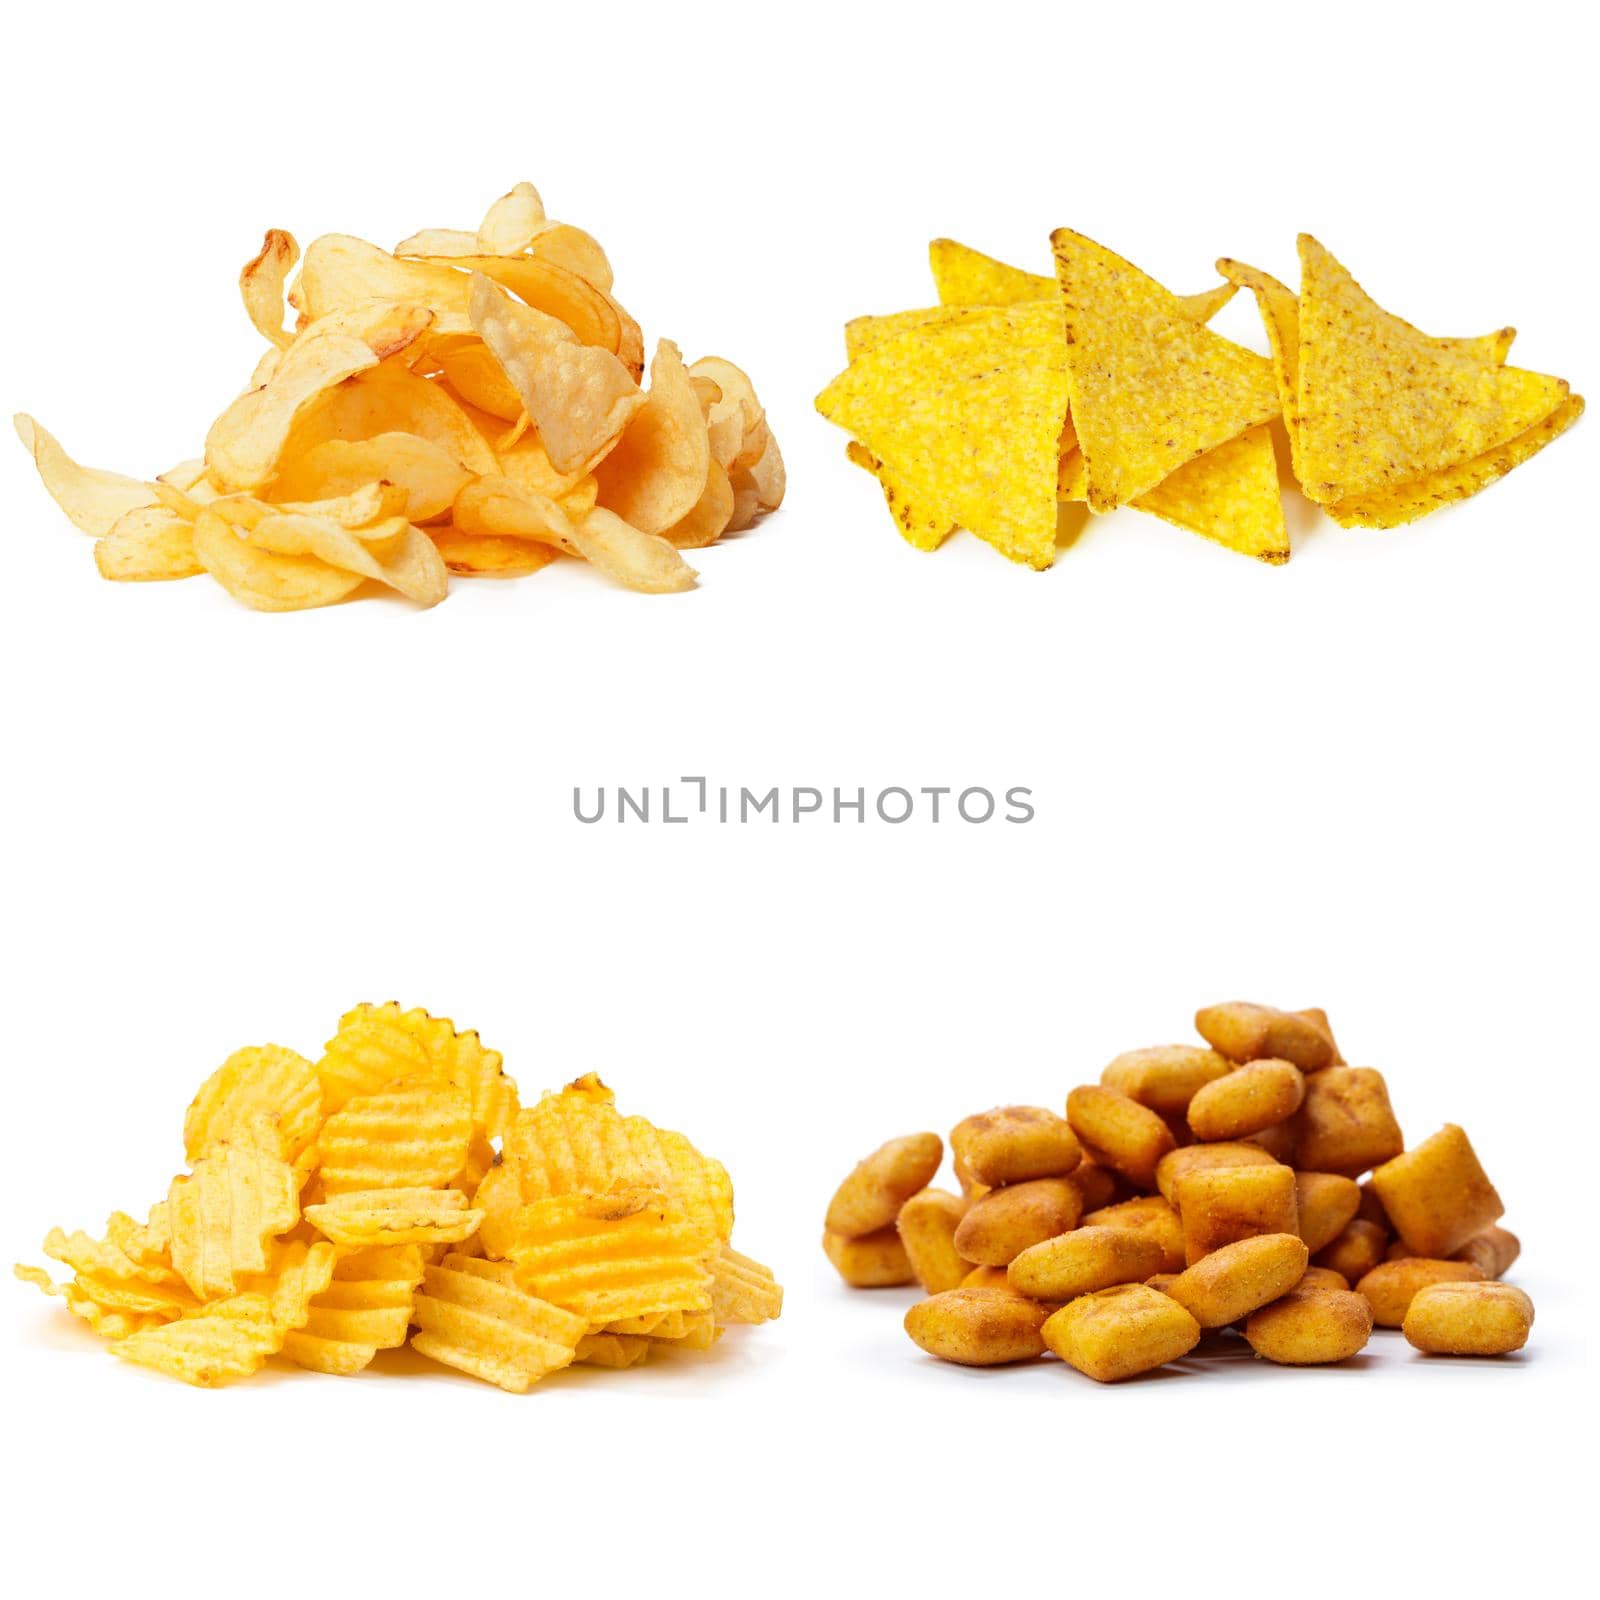 Salty snacks. Pretzels, chips, crackers collage